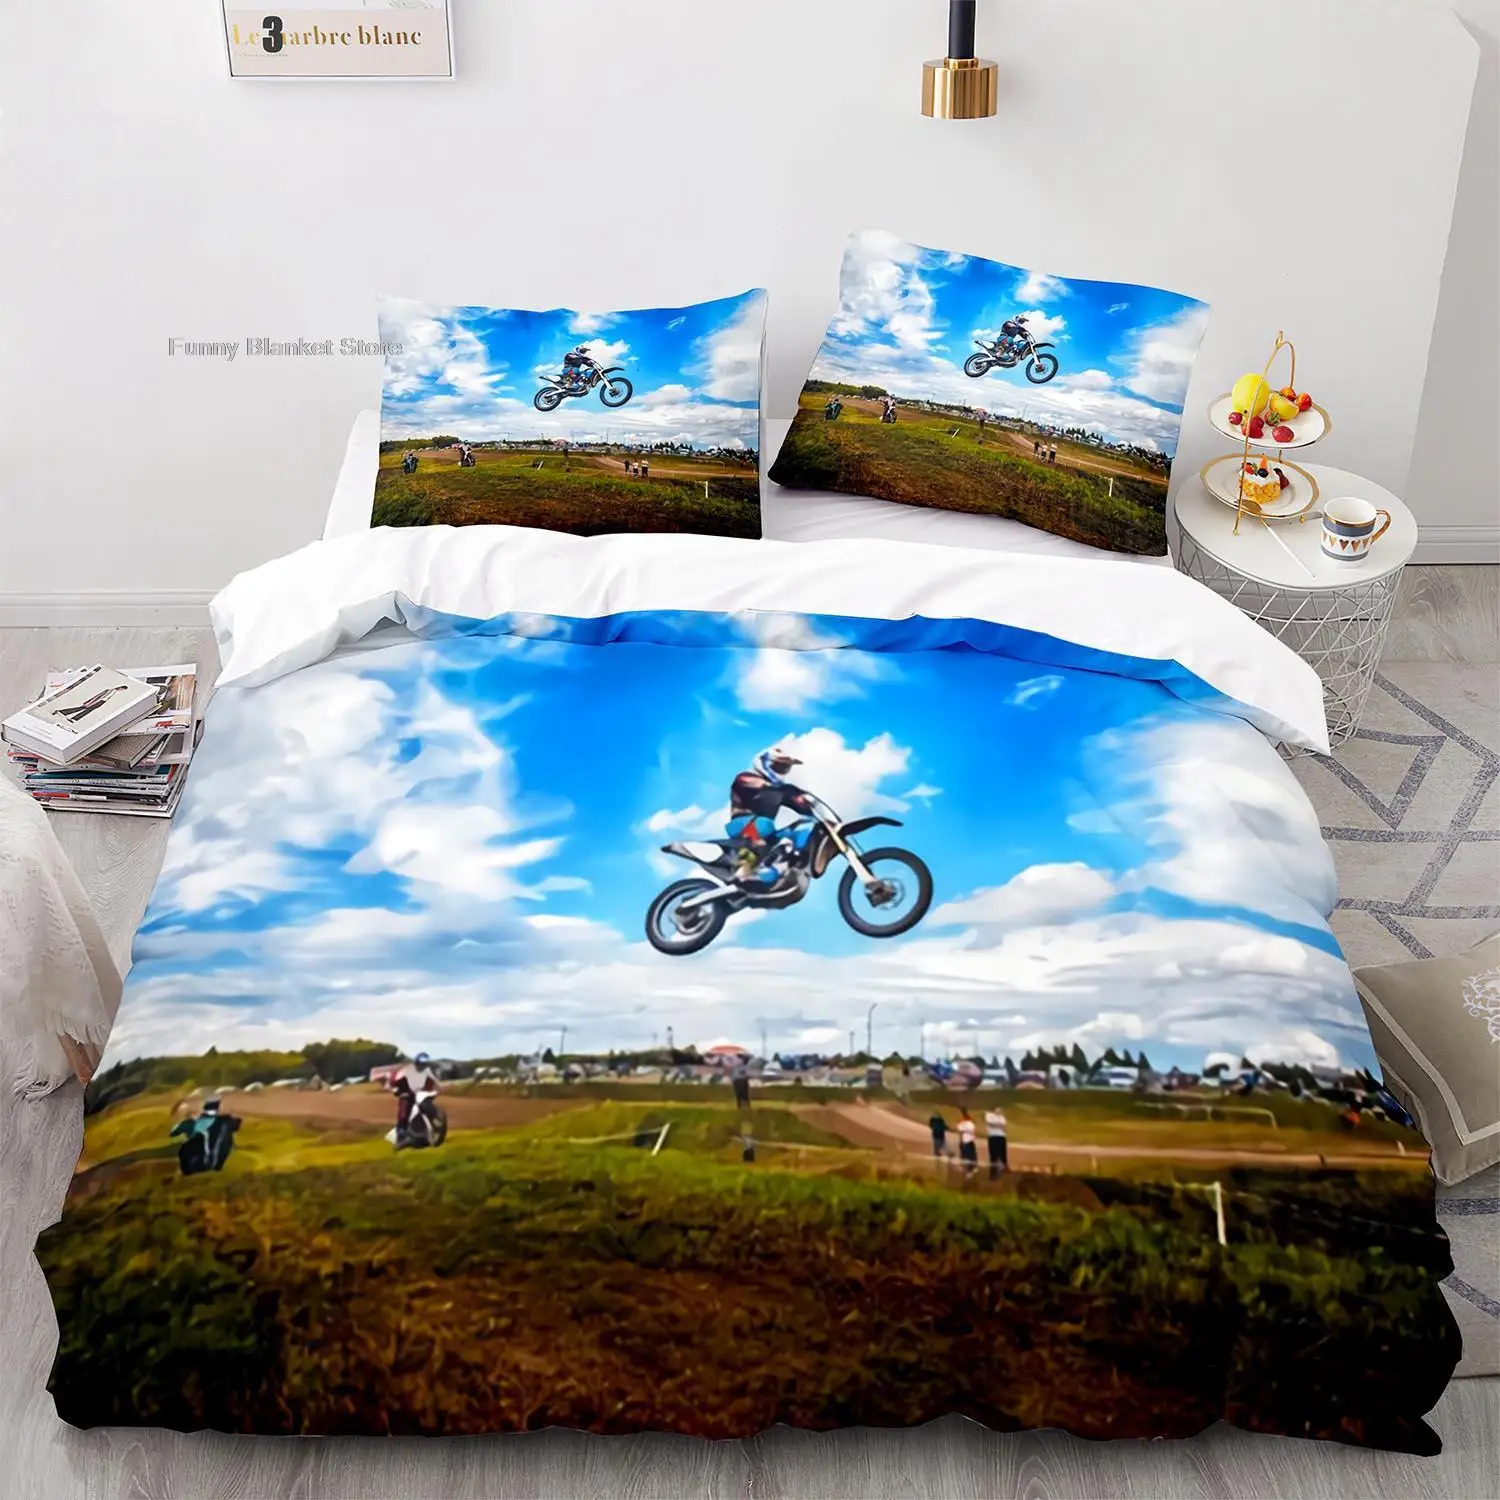 

New Extreme Sport Off-road Stunt Motorcycle Bedding Set Single Twin Full Queen King Size Bed Set Aldult Bedroom Duvetcover 004